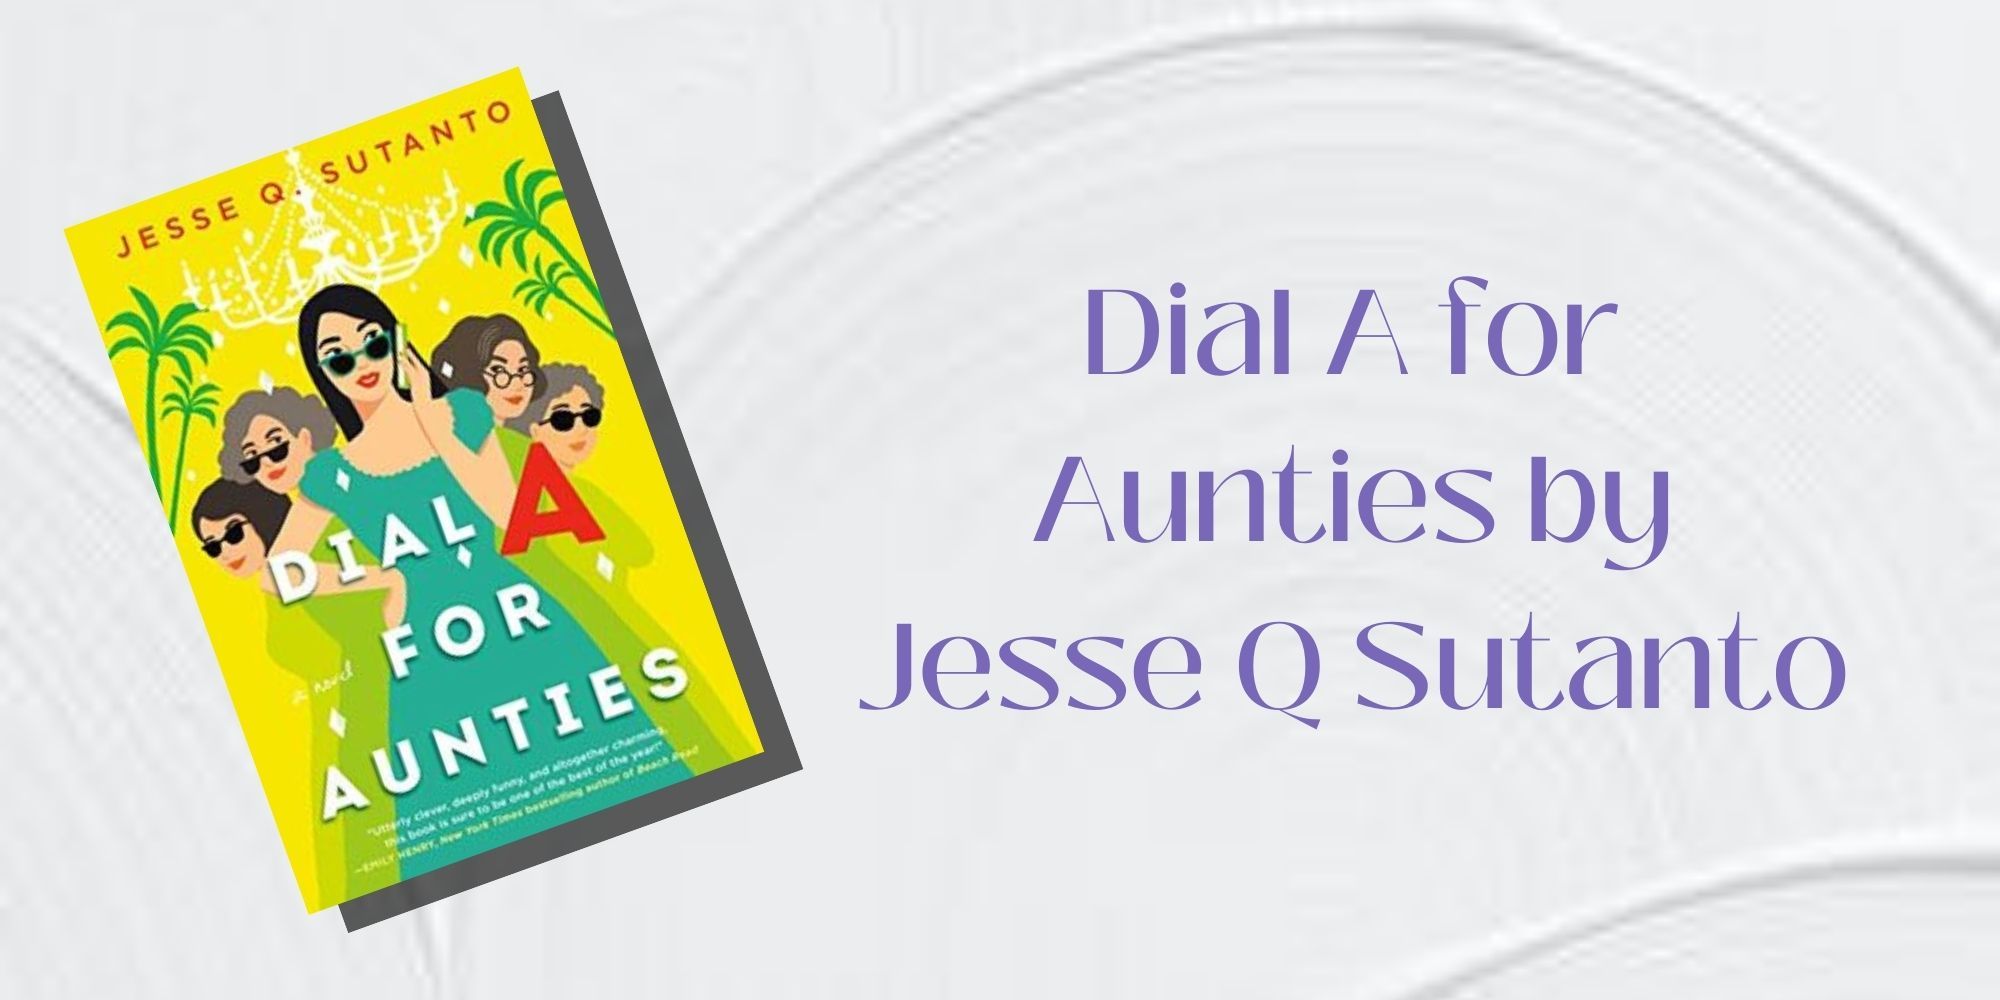 The cover of Dial A for Aunties by Jesse Q Sutanto